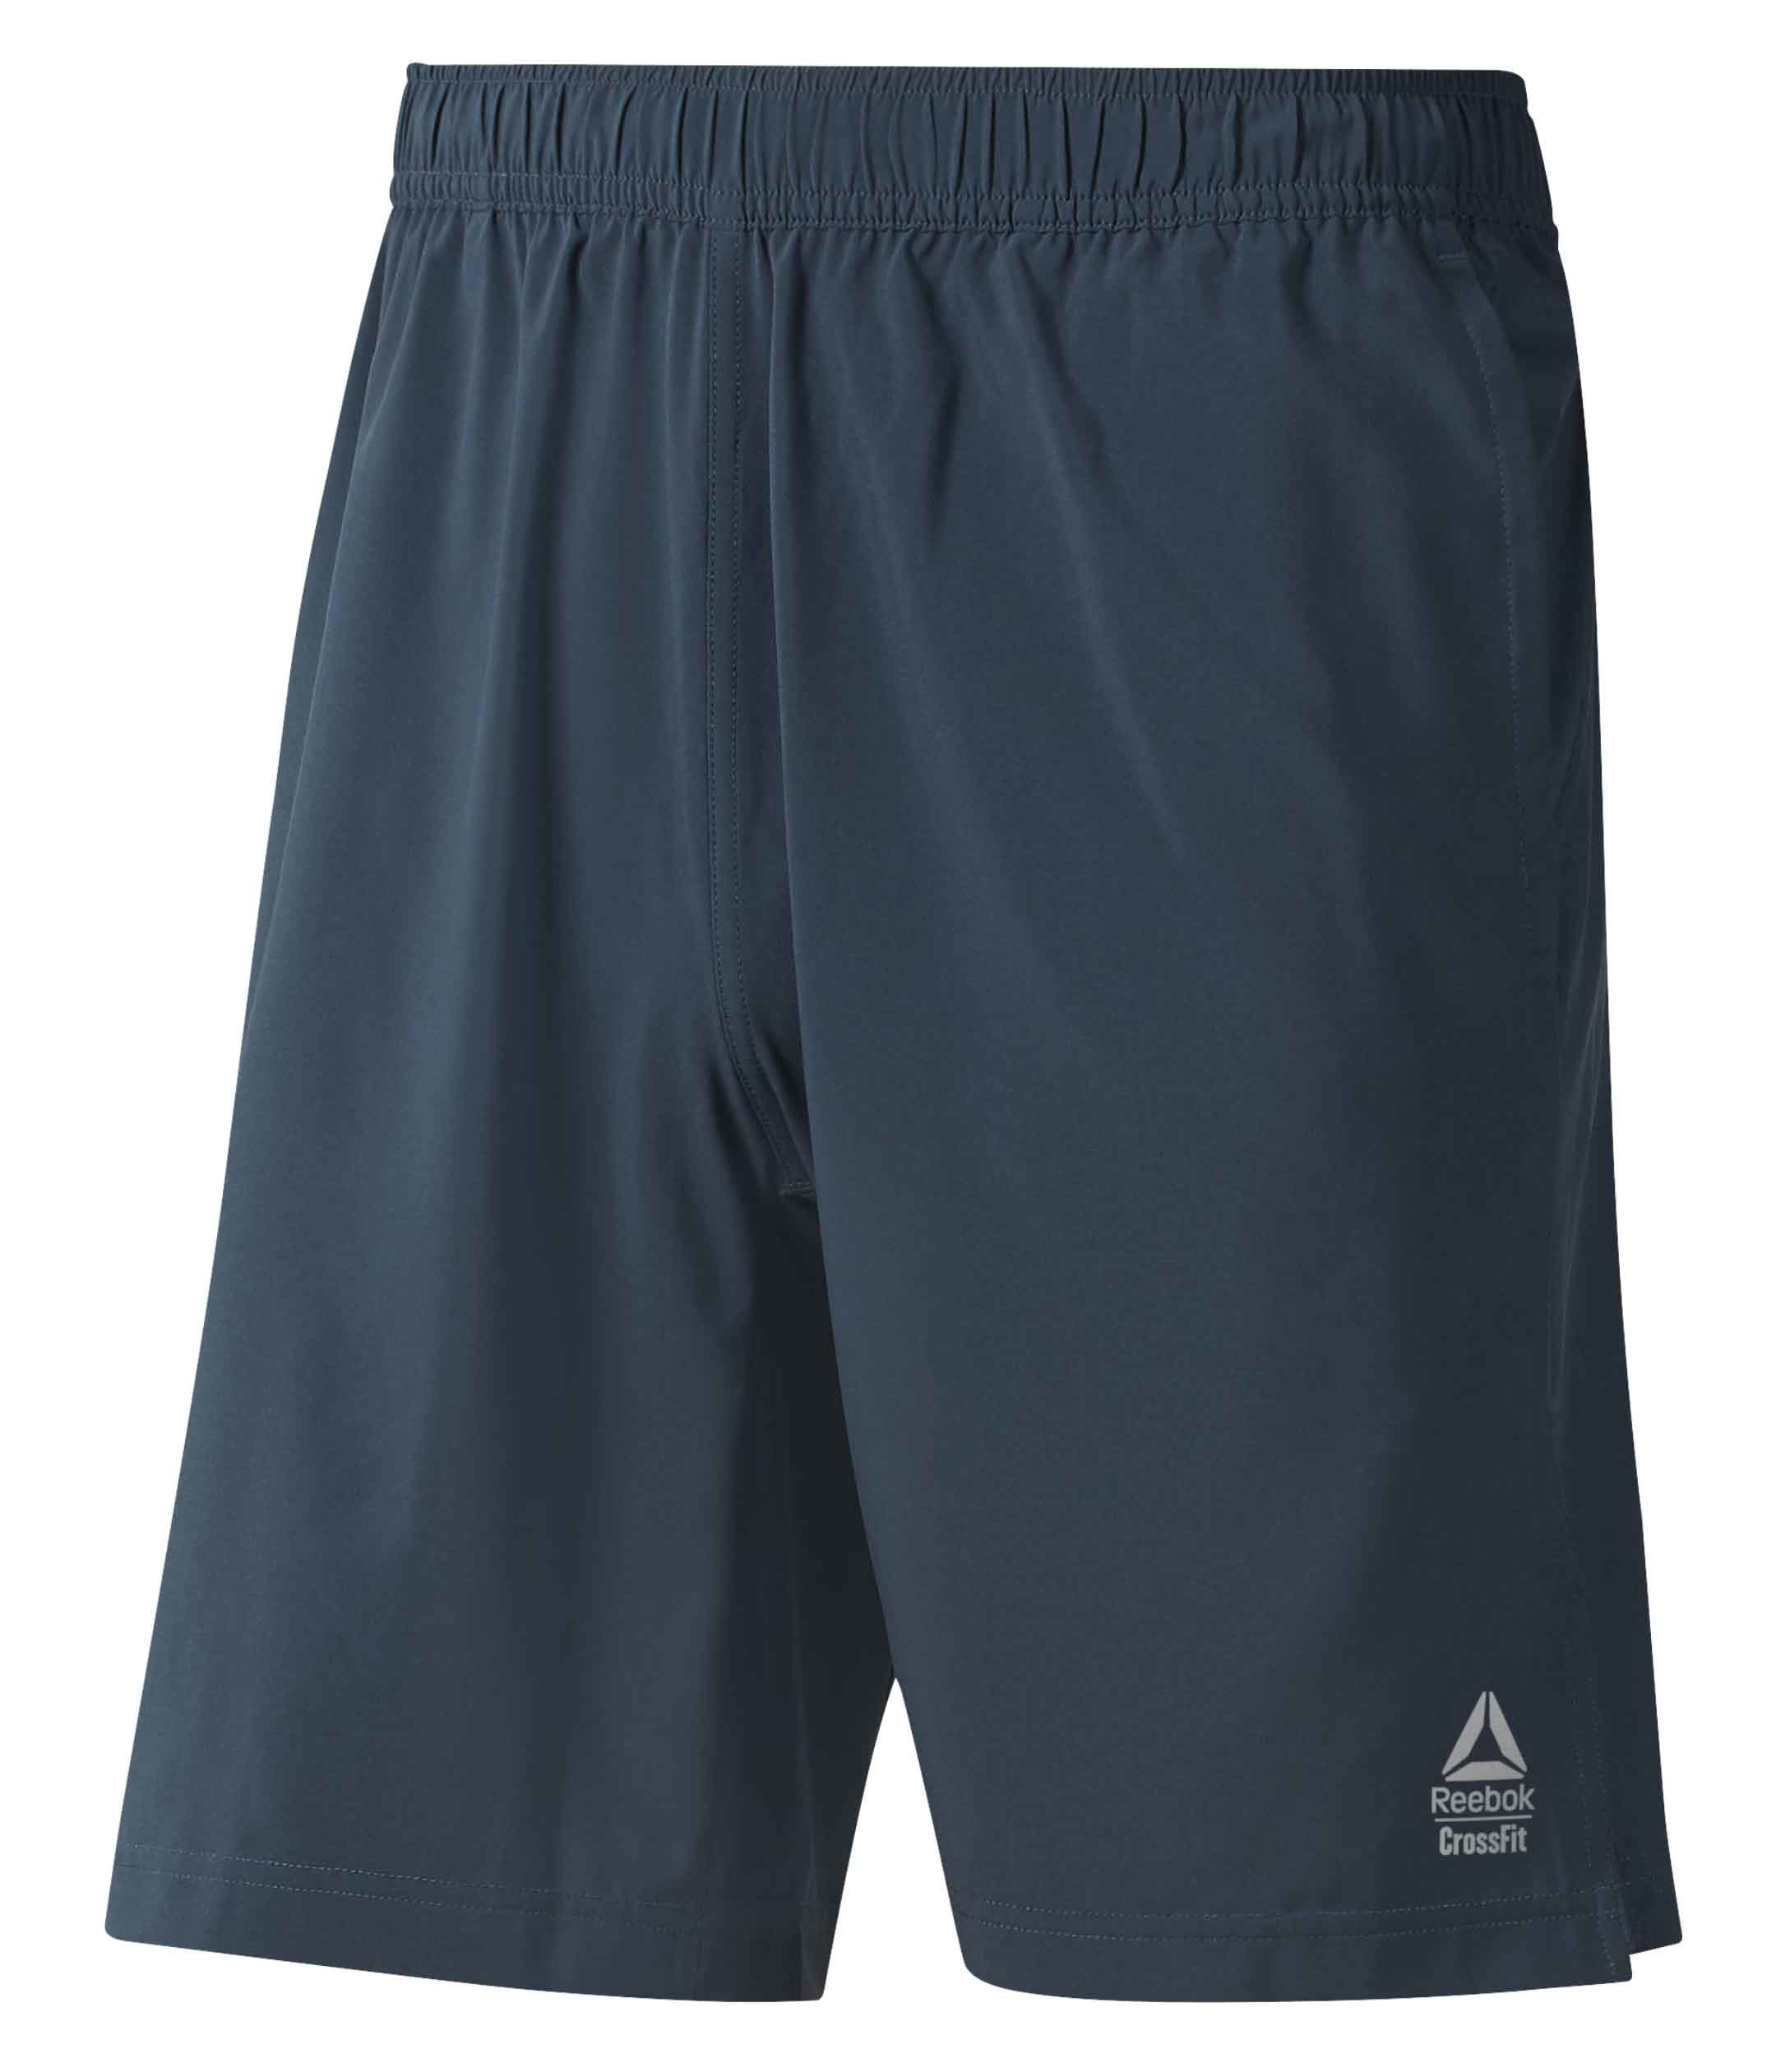 wereld Toegeven Dochter Best CrossFit Shorts for Men: Find the Right Pair for Your Next Workout